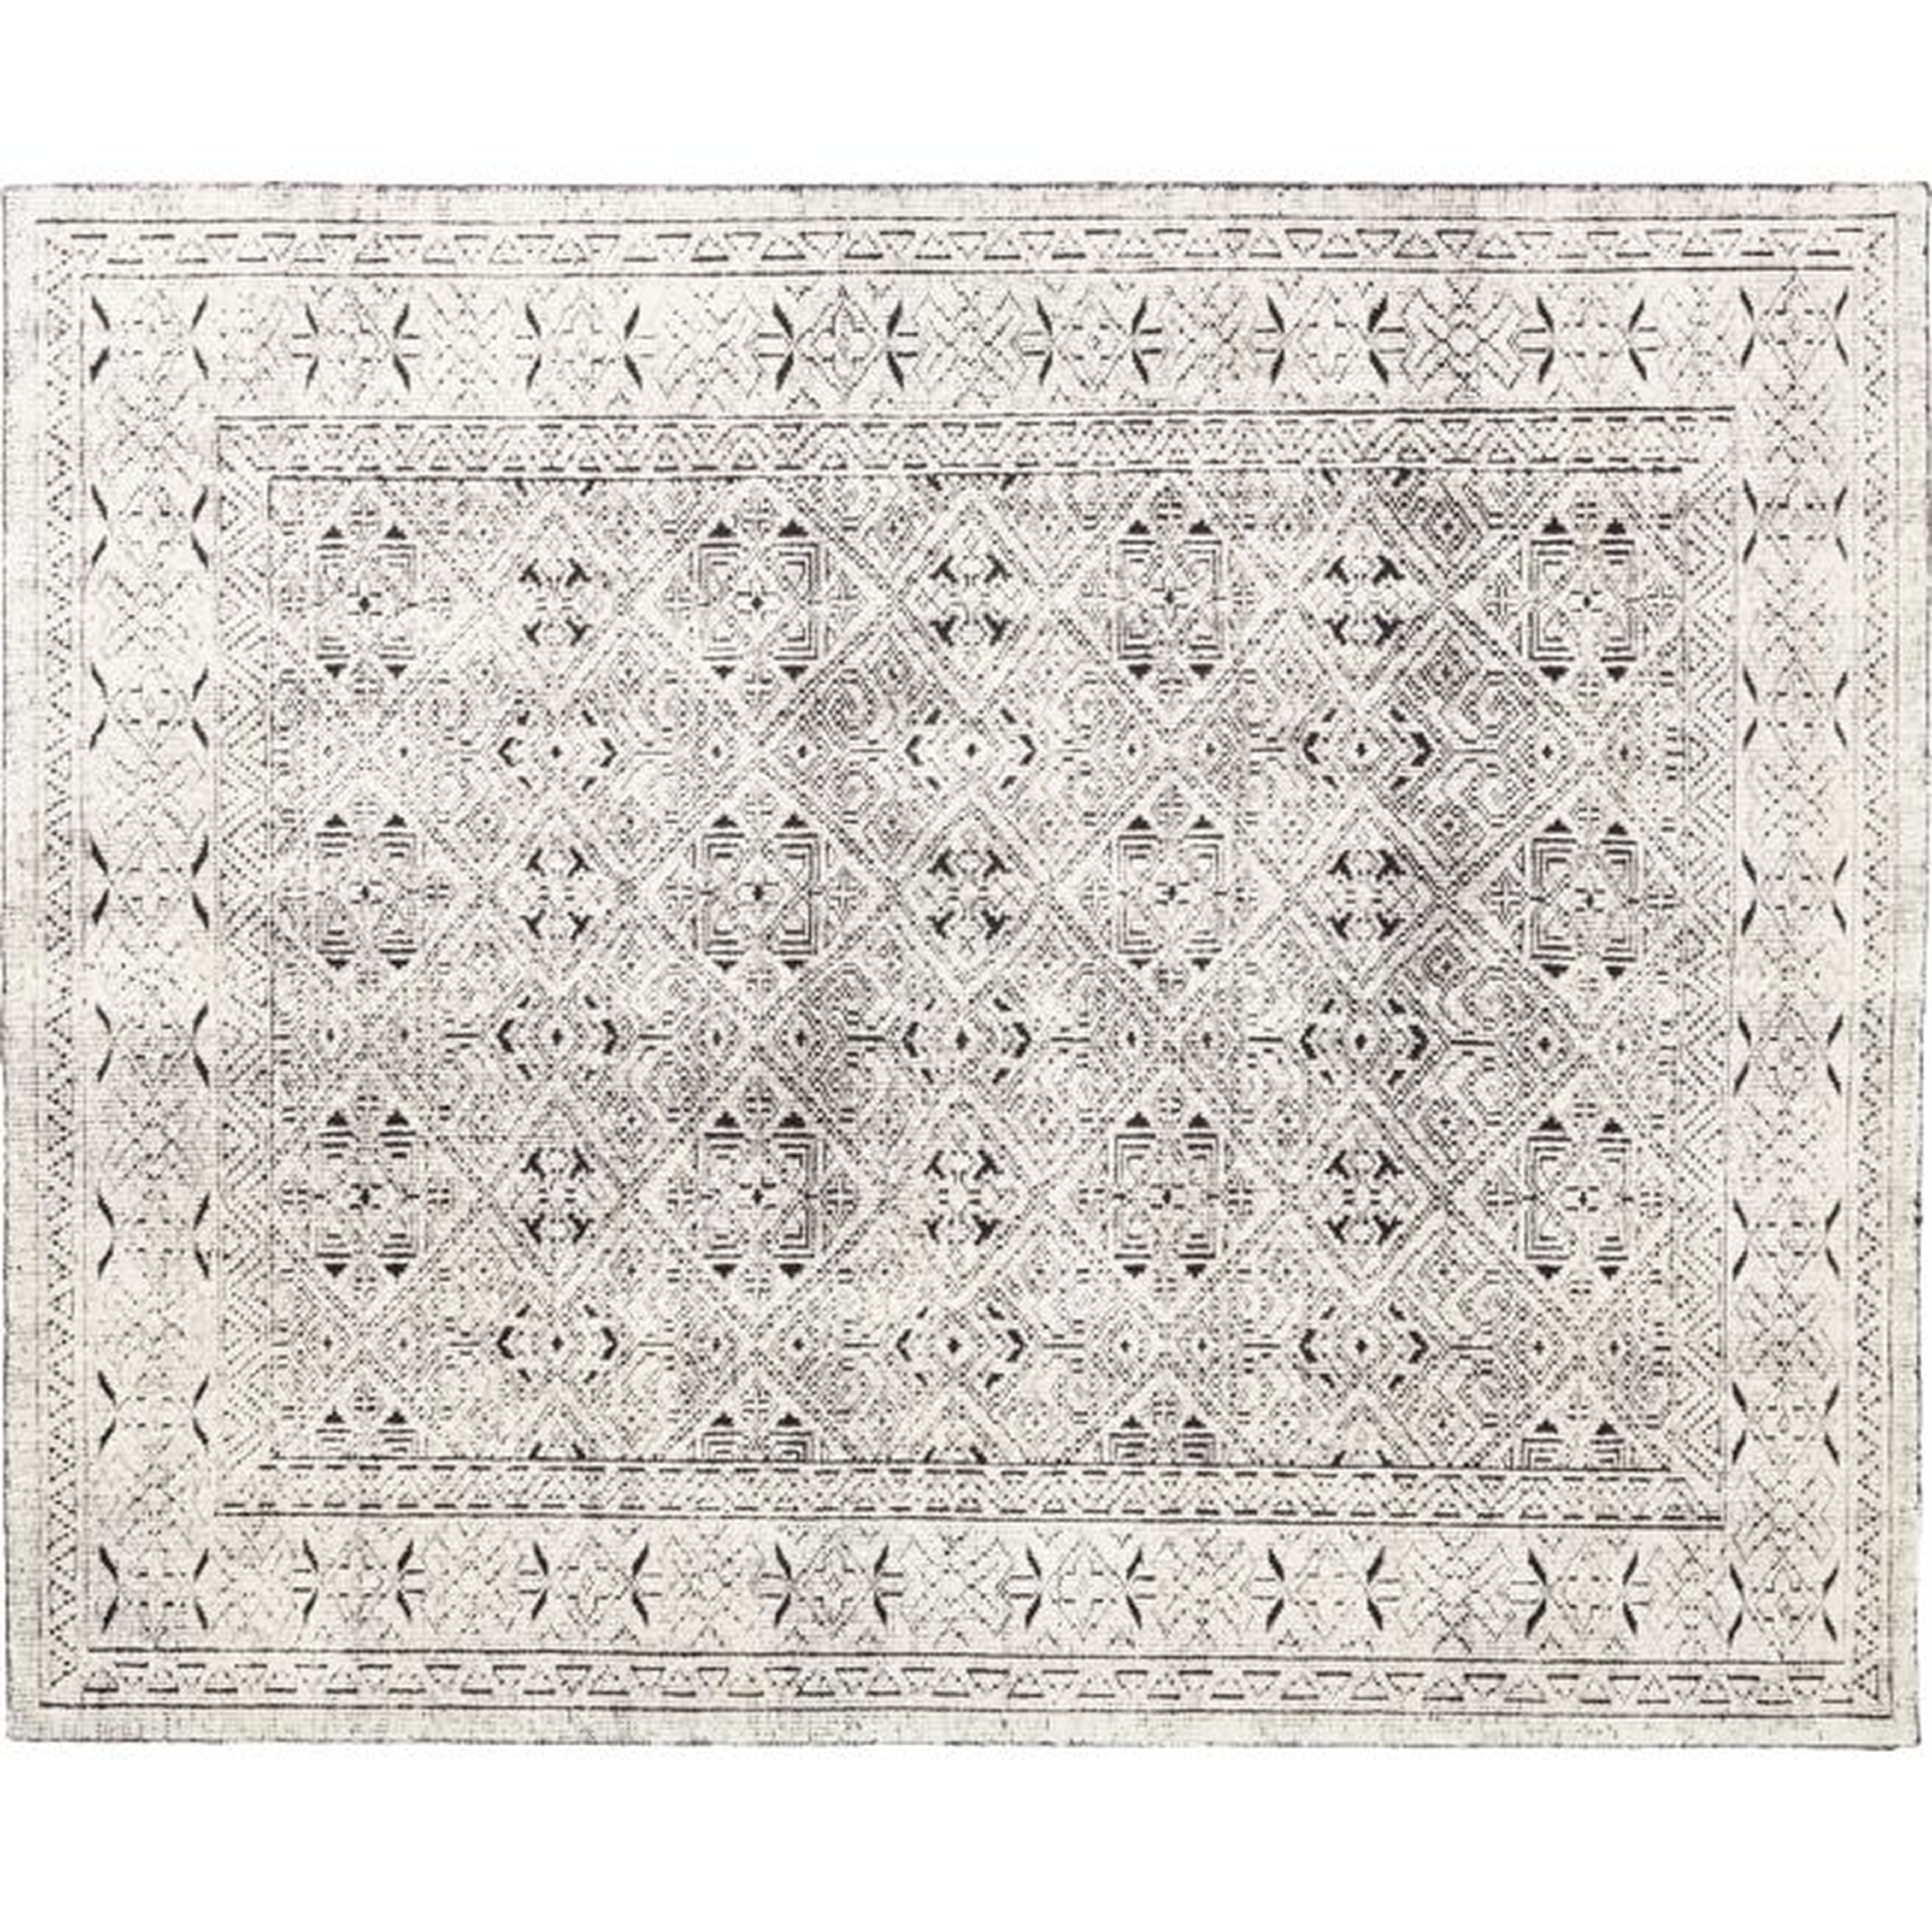 Raumont Hand-Knotted Black Detailed Area Rug 8'x10' - CB2